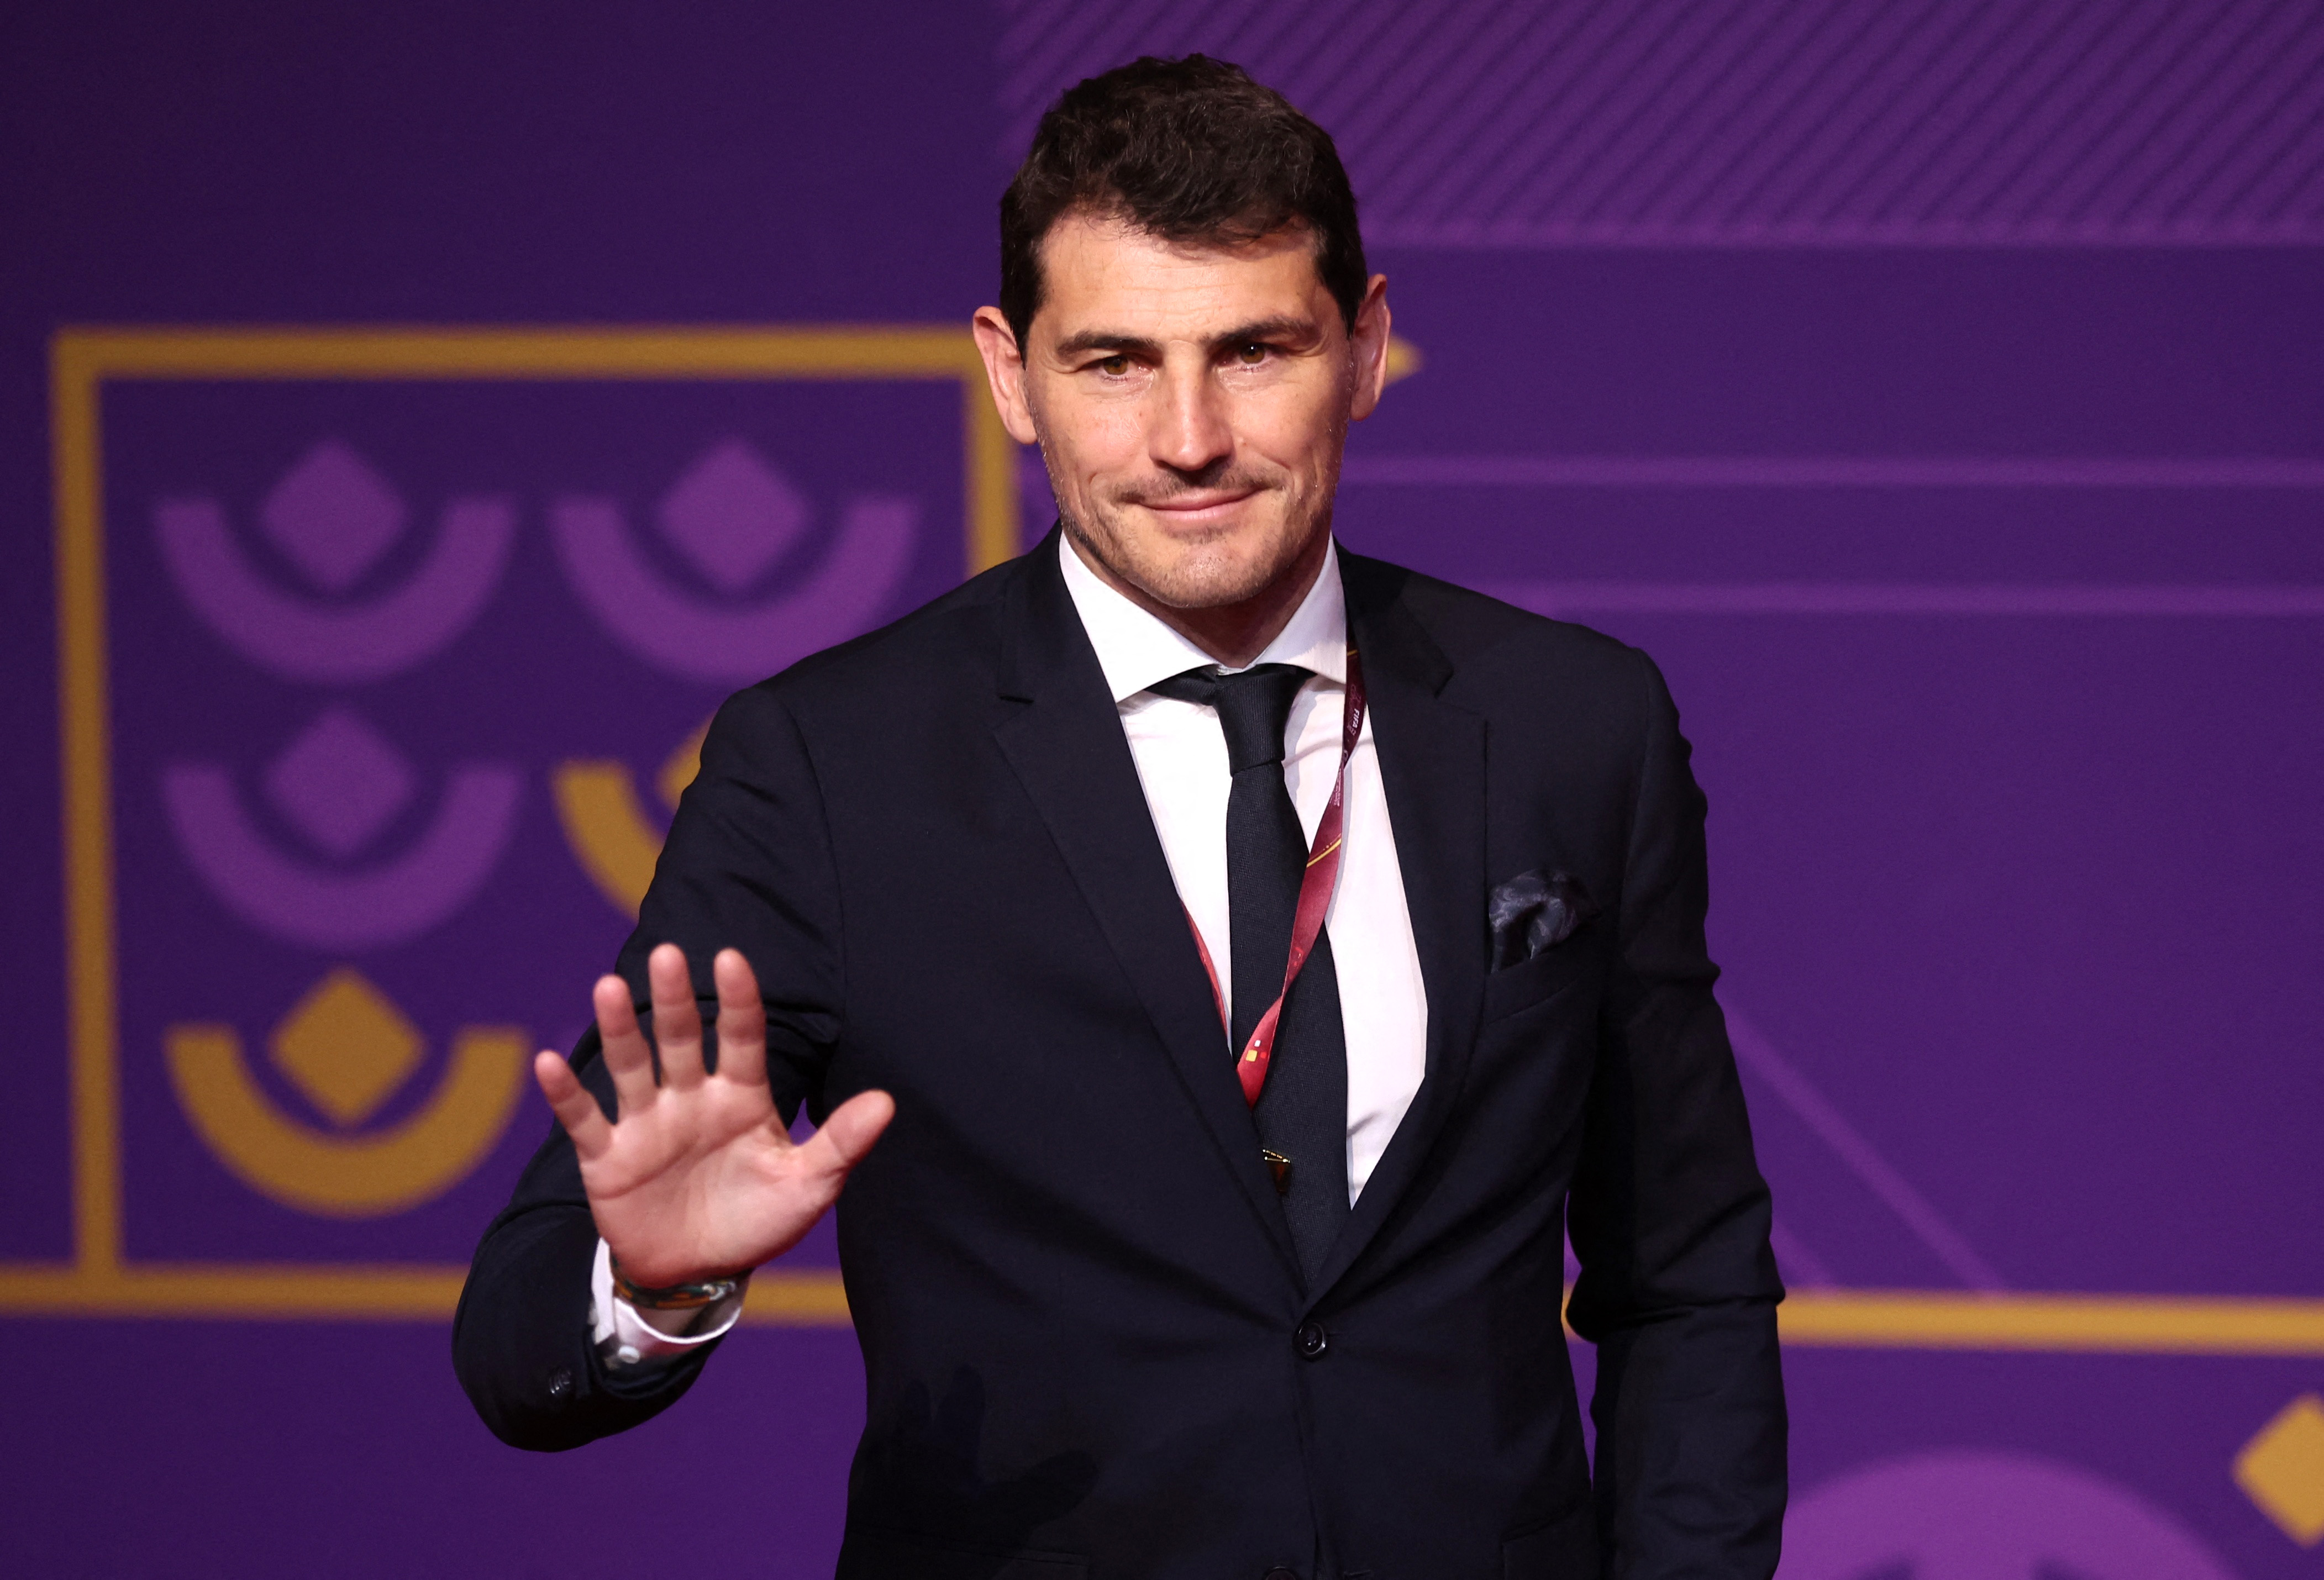 Soccer Football - World Cup - Final Draw - Doha Exhibition & Convention Center, Doha, Qatar - April 1, 2022 Former player Iker Casillas arrives ahead of the draw REUTERS/Carl Recine